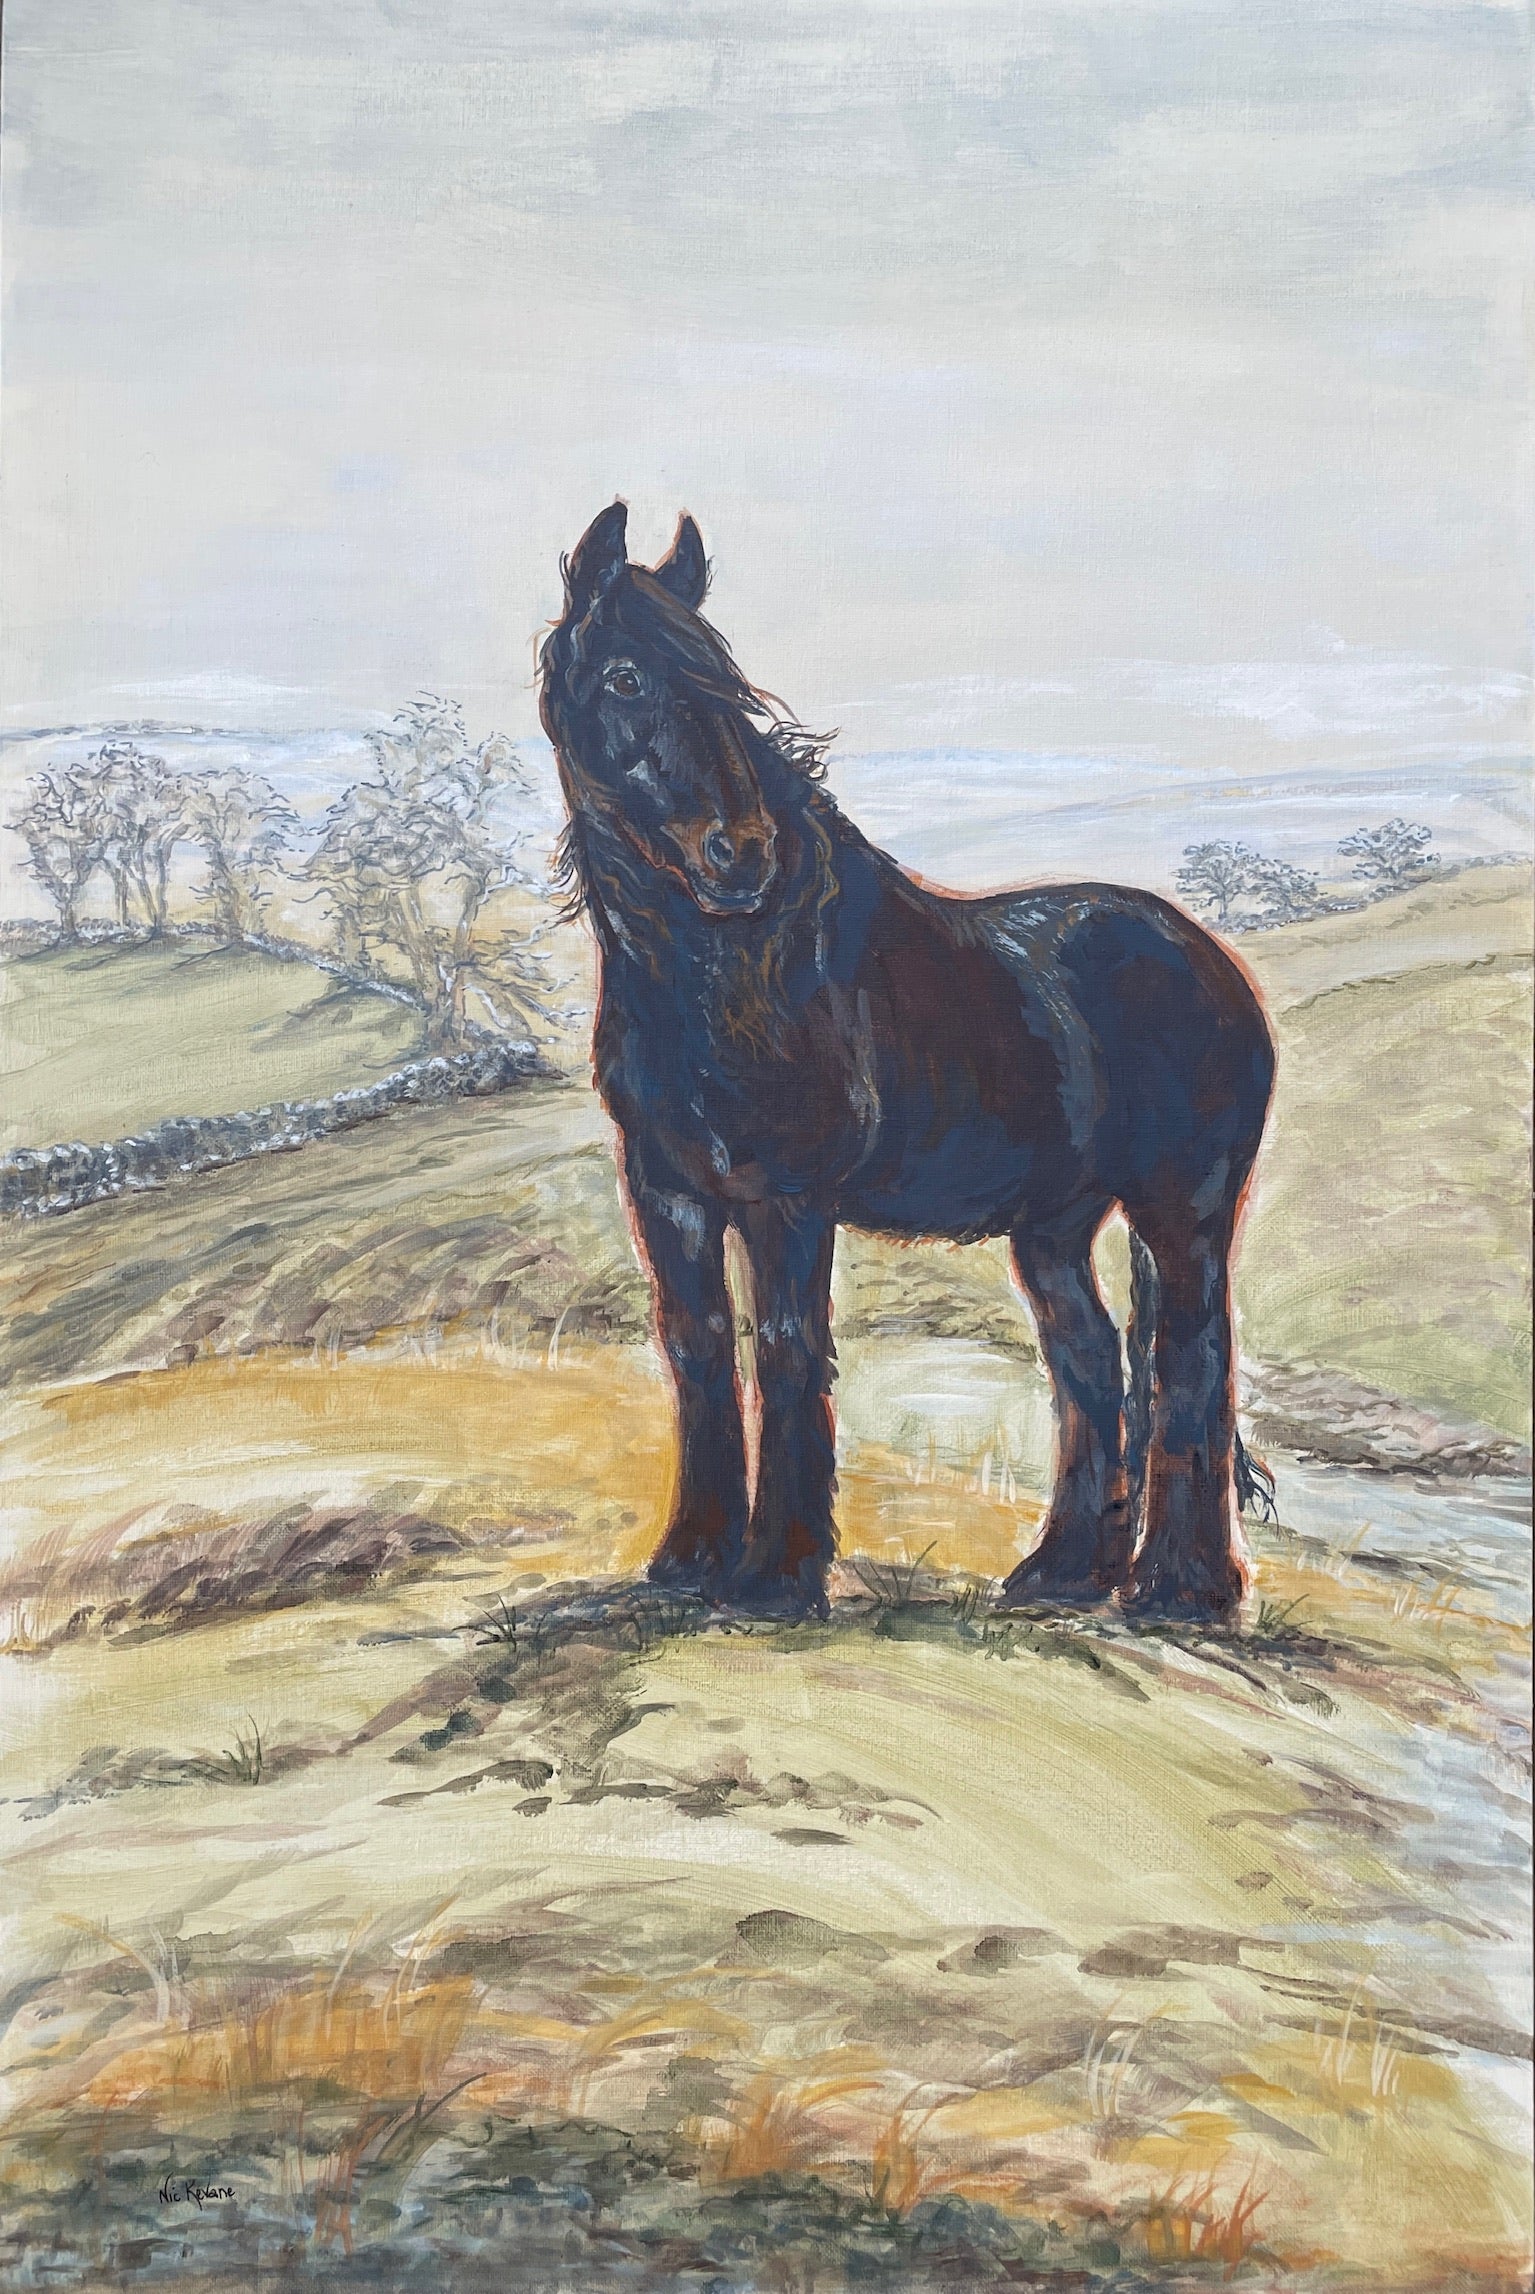 The focus of this painting is a majestic Dales pony in the rugged countryside terrain of the Yorkshire Dales. 